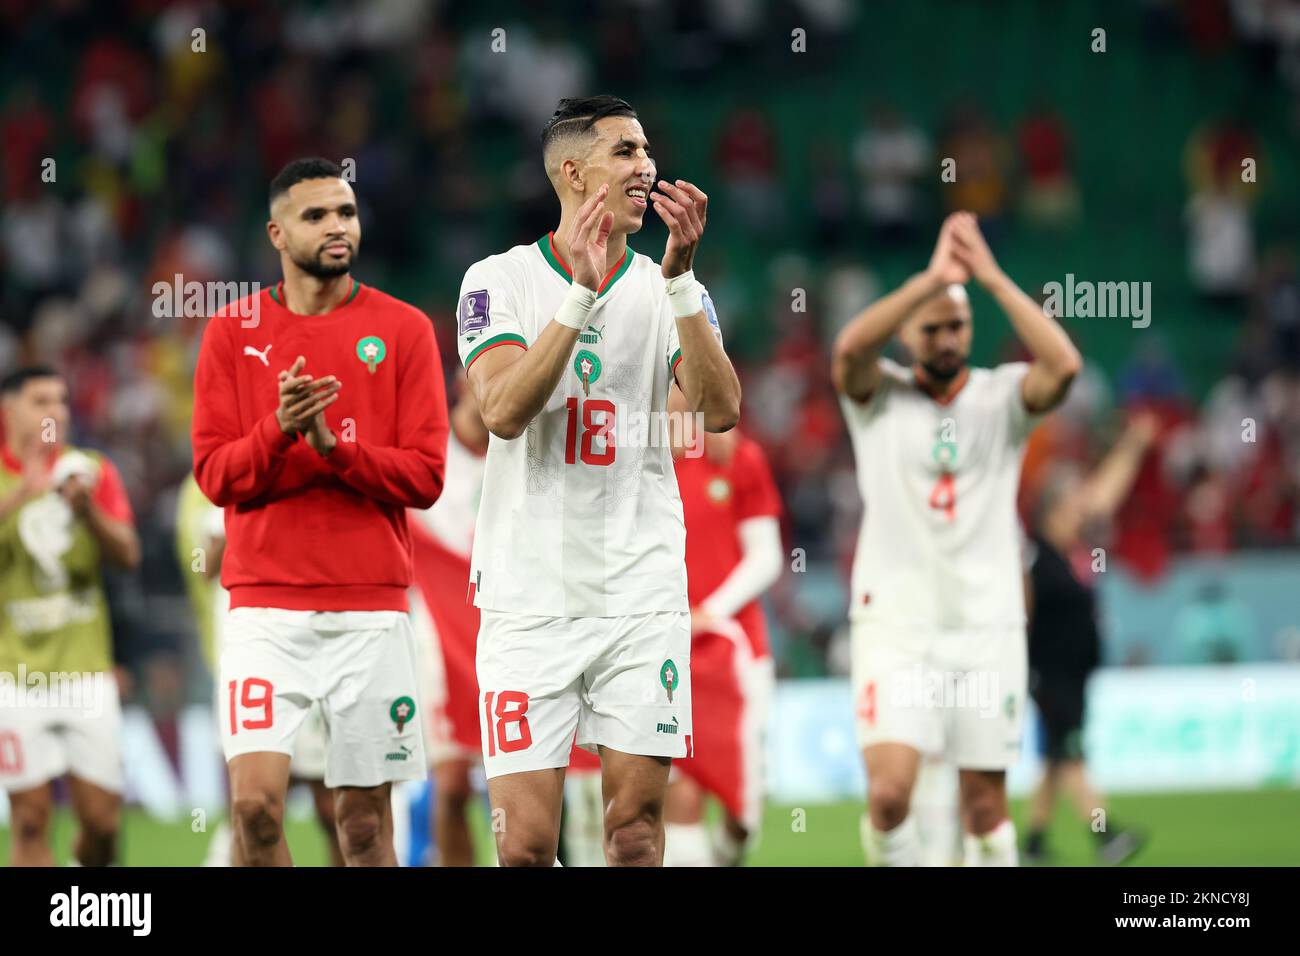 Moroccan Youssef En-Nesyri and Moroccan Jawad El Yamiq celebrate after winning a soccer game between Belgium's national team the Red Devils and Morocco, in Group F of the FIFA 2022 World Cup in Al Thumama Stadium, Doha, State of Qatar on Sunday 27 November 2022. BELGA PHOTO BRUNO FAHY Stock Photo